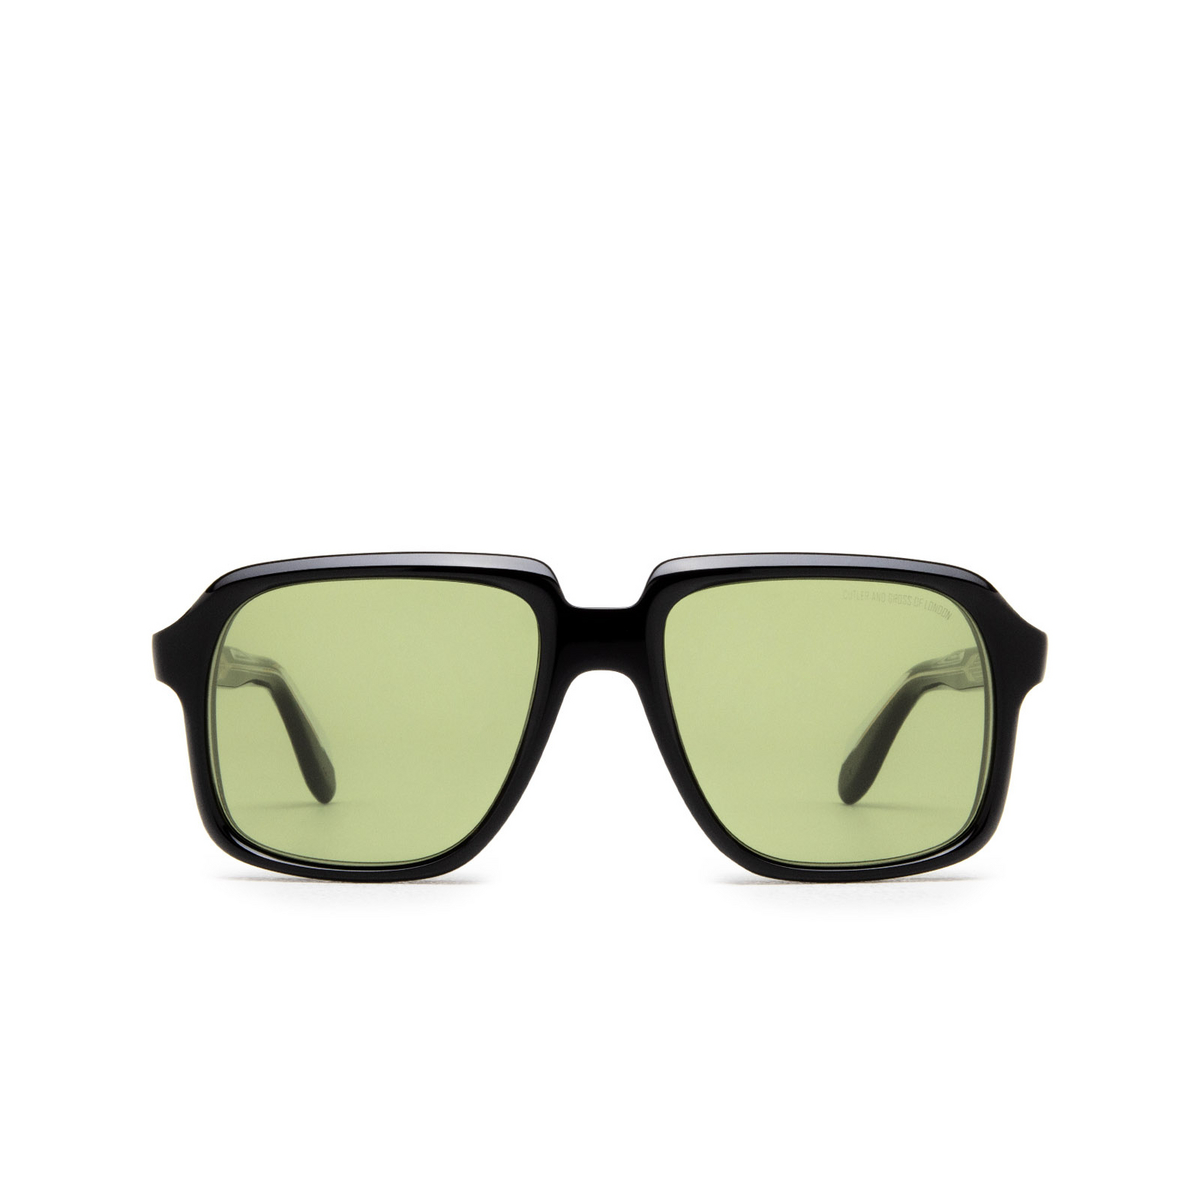 Cutler and Gross 1397 Sunglasses 01 Black - front view